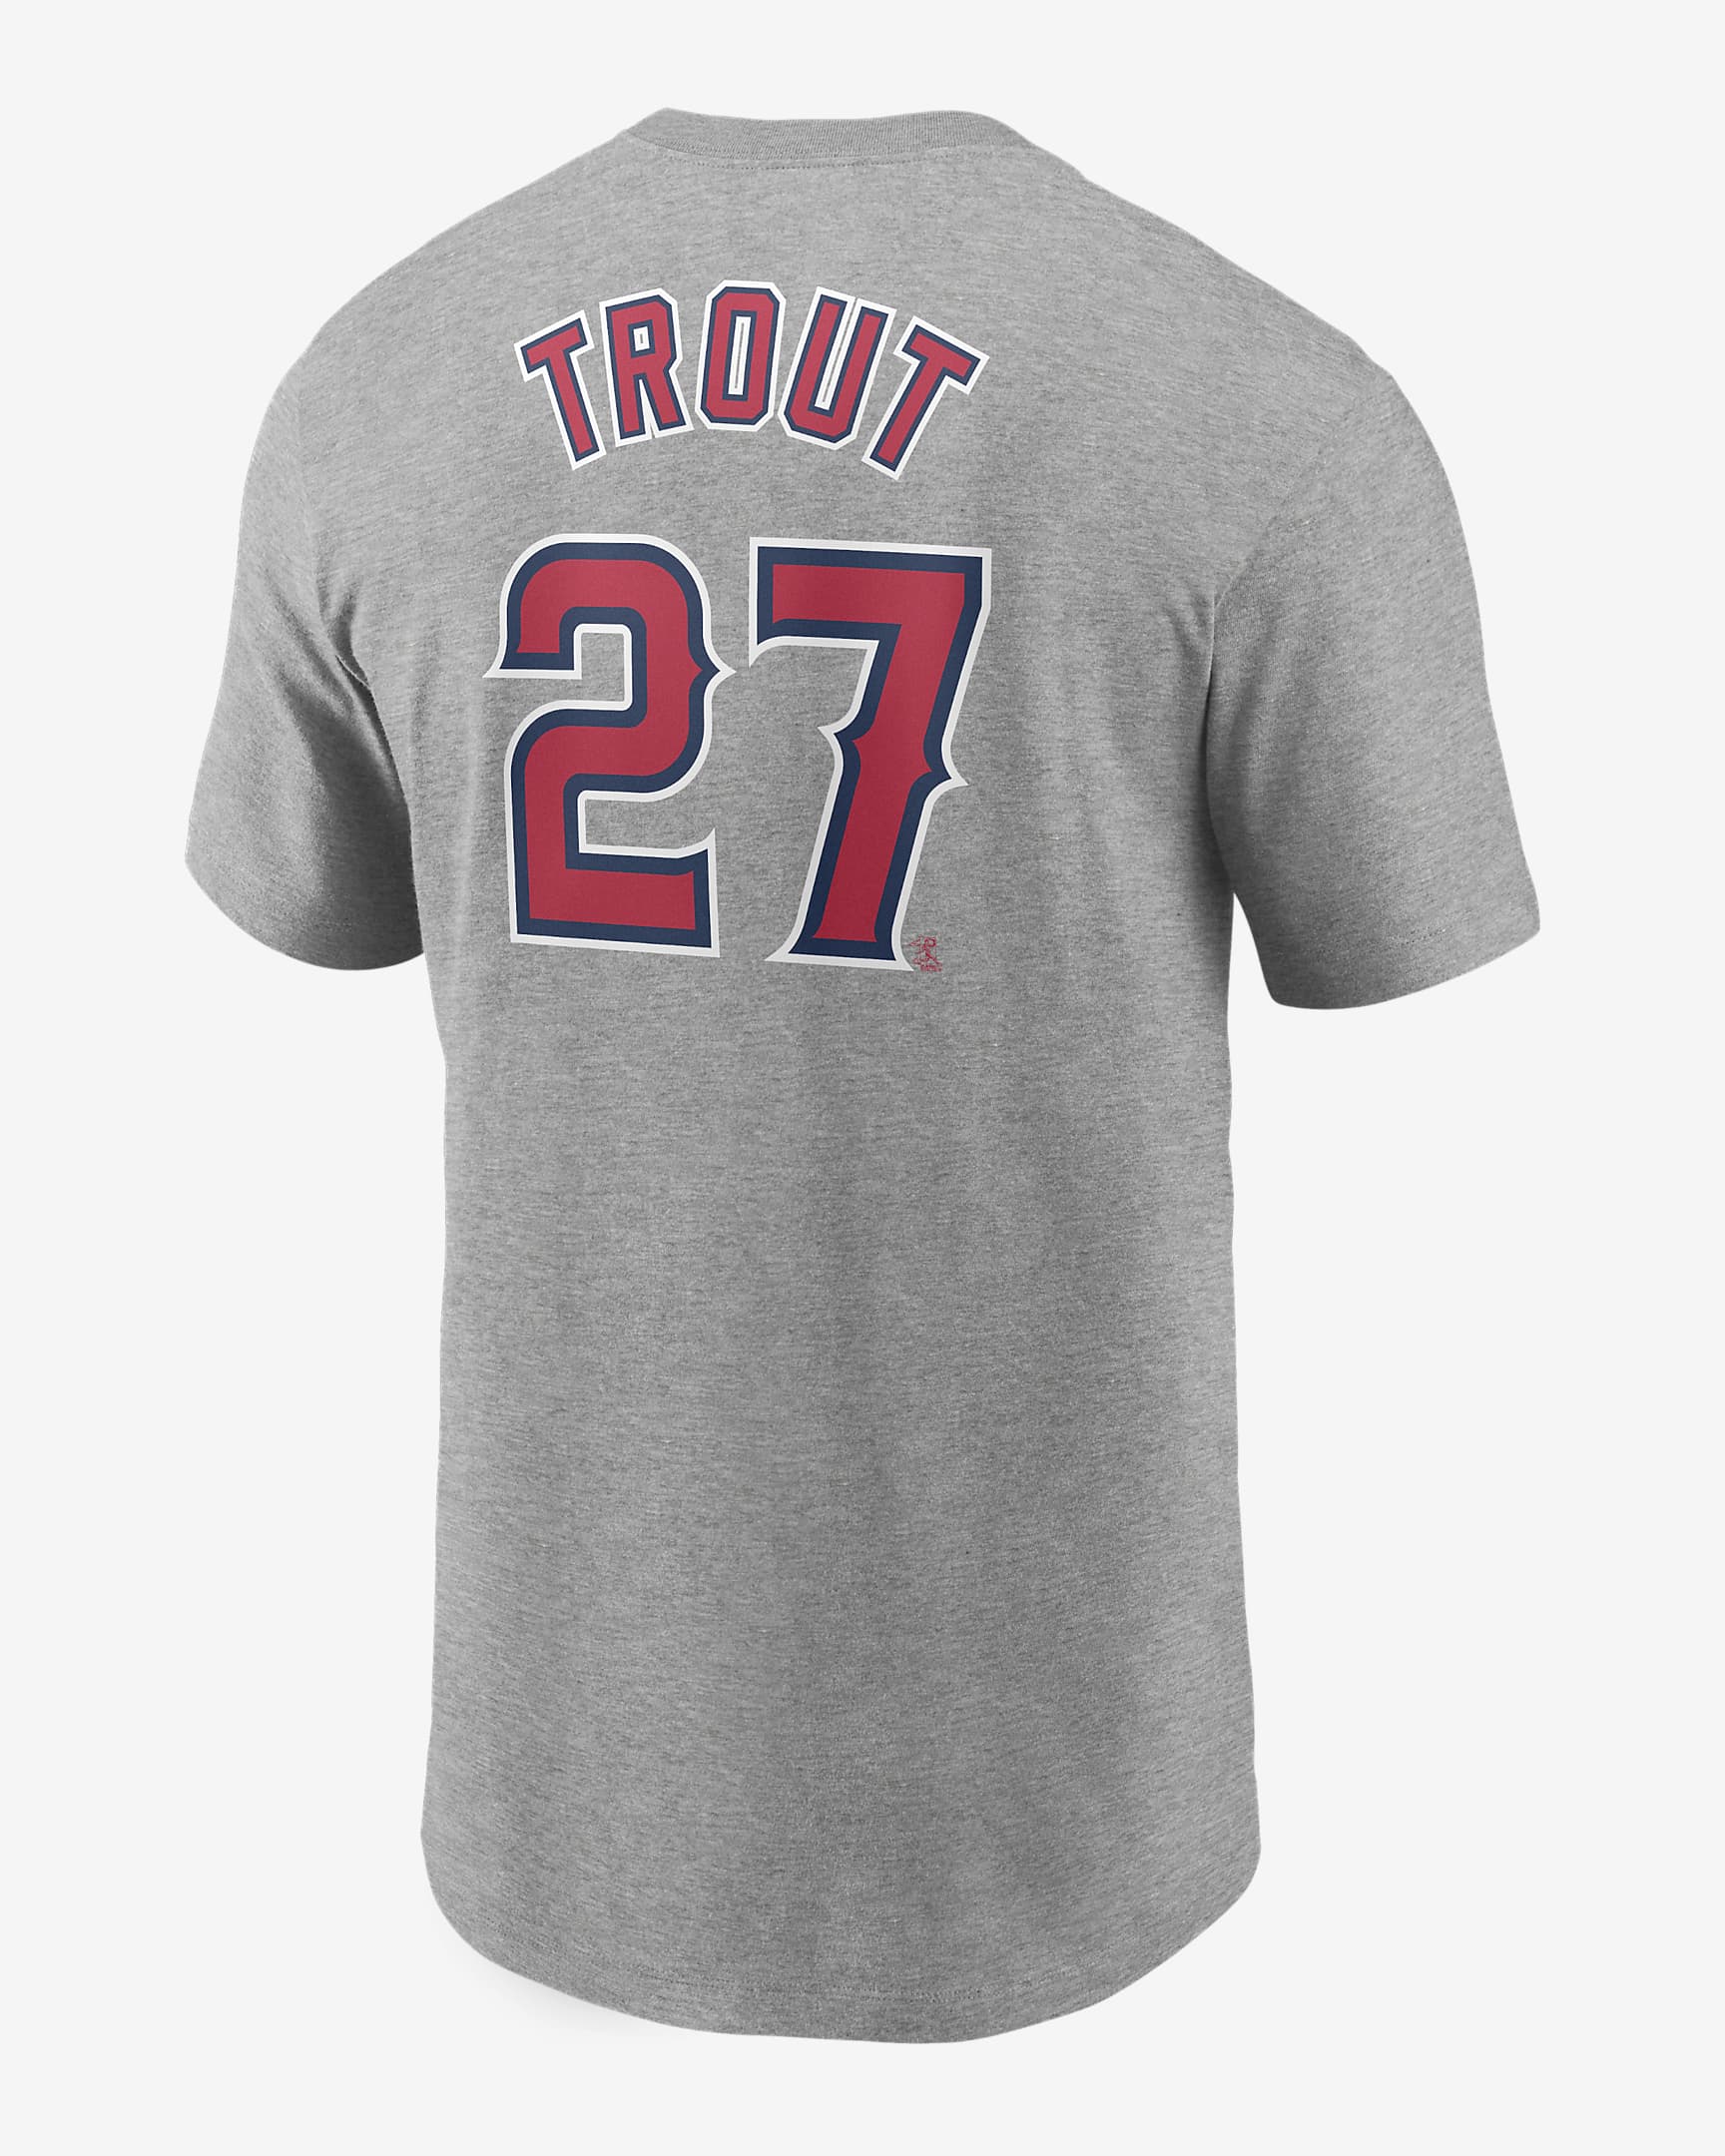 MLB Los Angeles Angels (Mike Trout) Men's T-Shirt - Metallic Silver